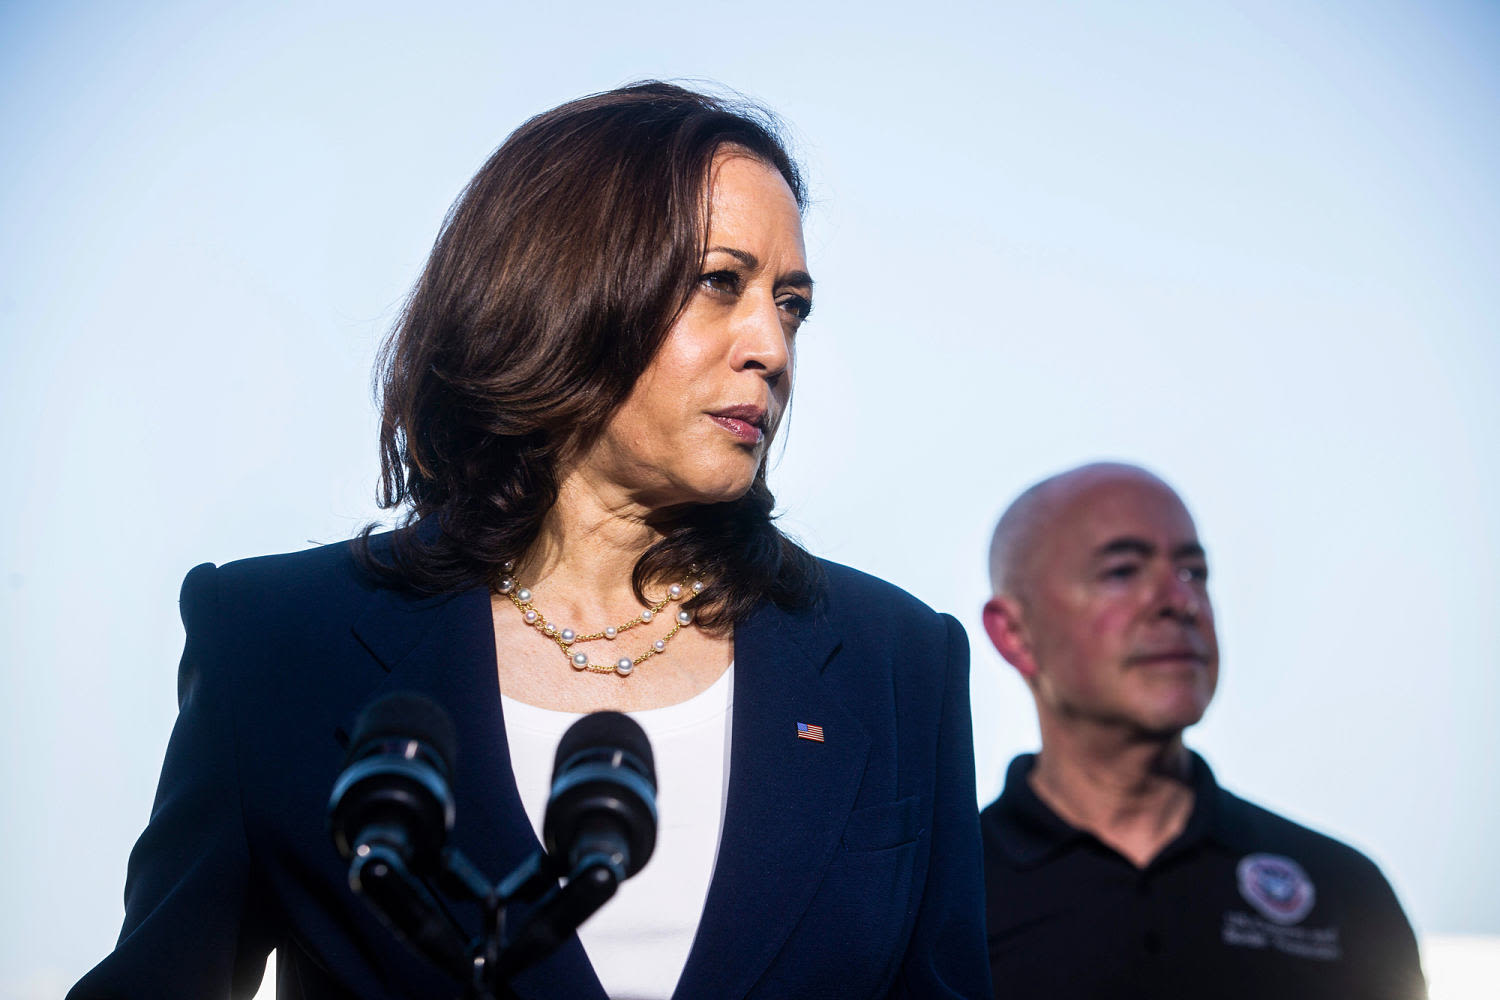 Harris is talking about immigration more, and her allies think it could be a political advantage